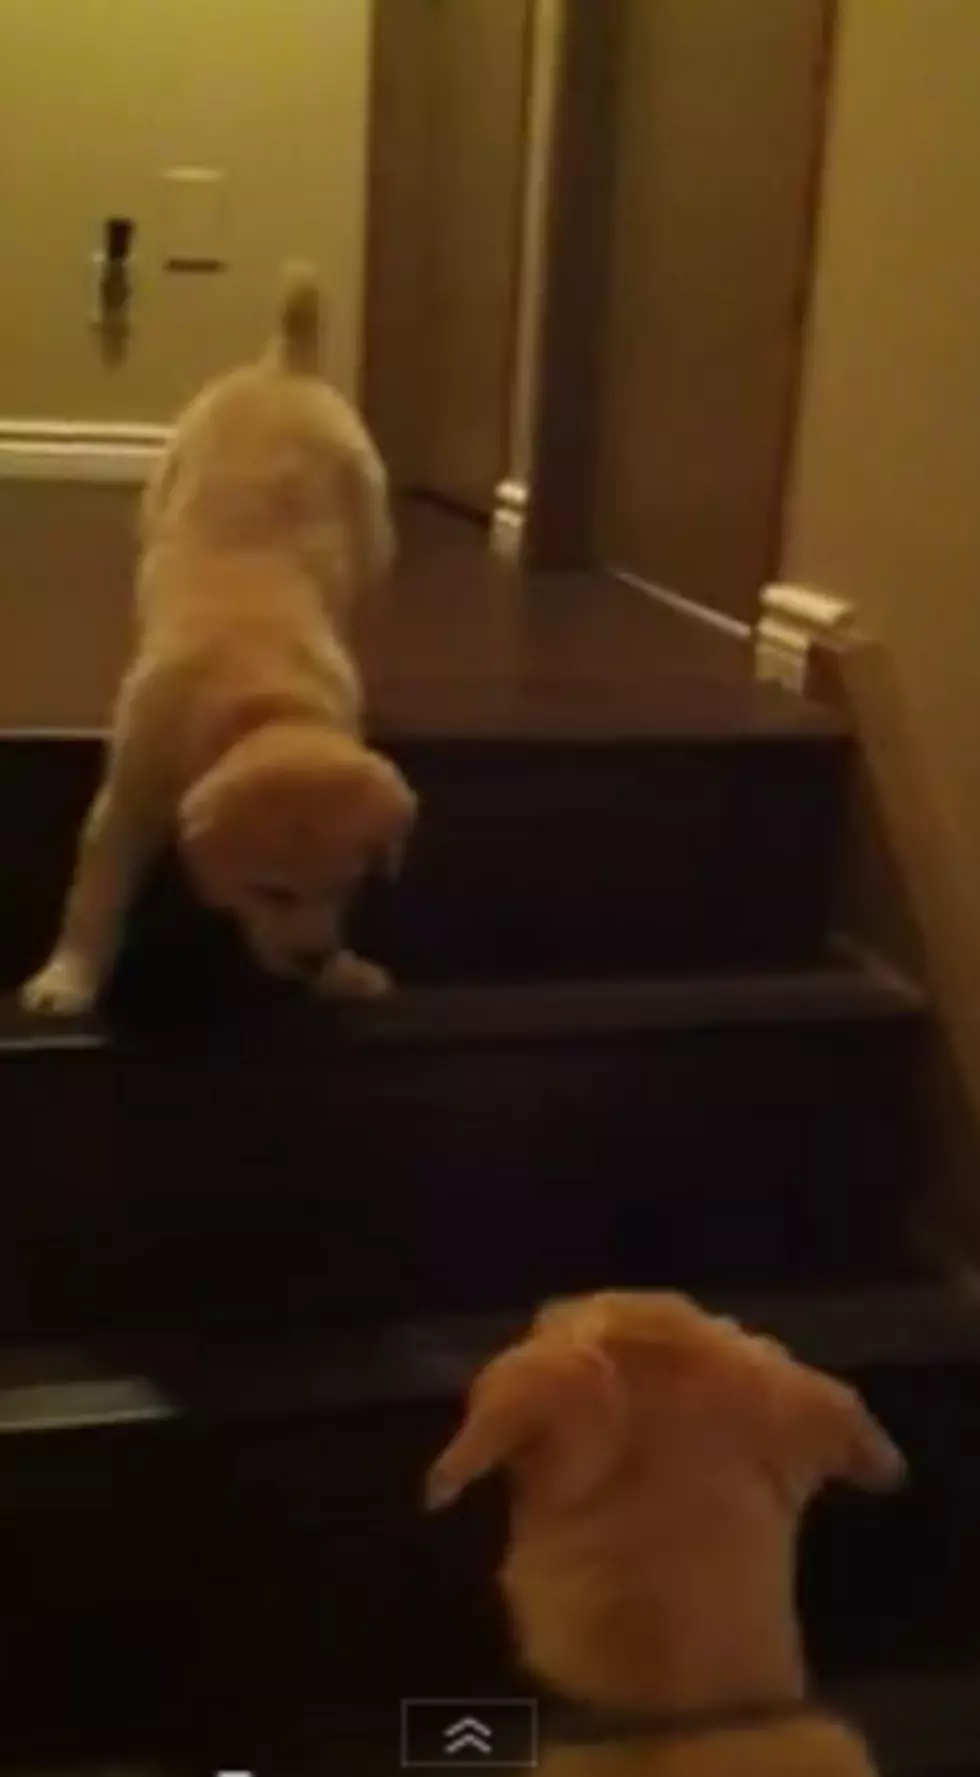 Adorable Video of Puppy Teaching Puppy to Walk Down Stairs